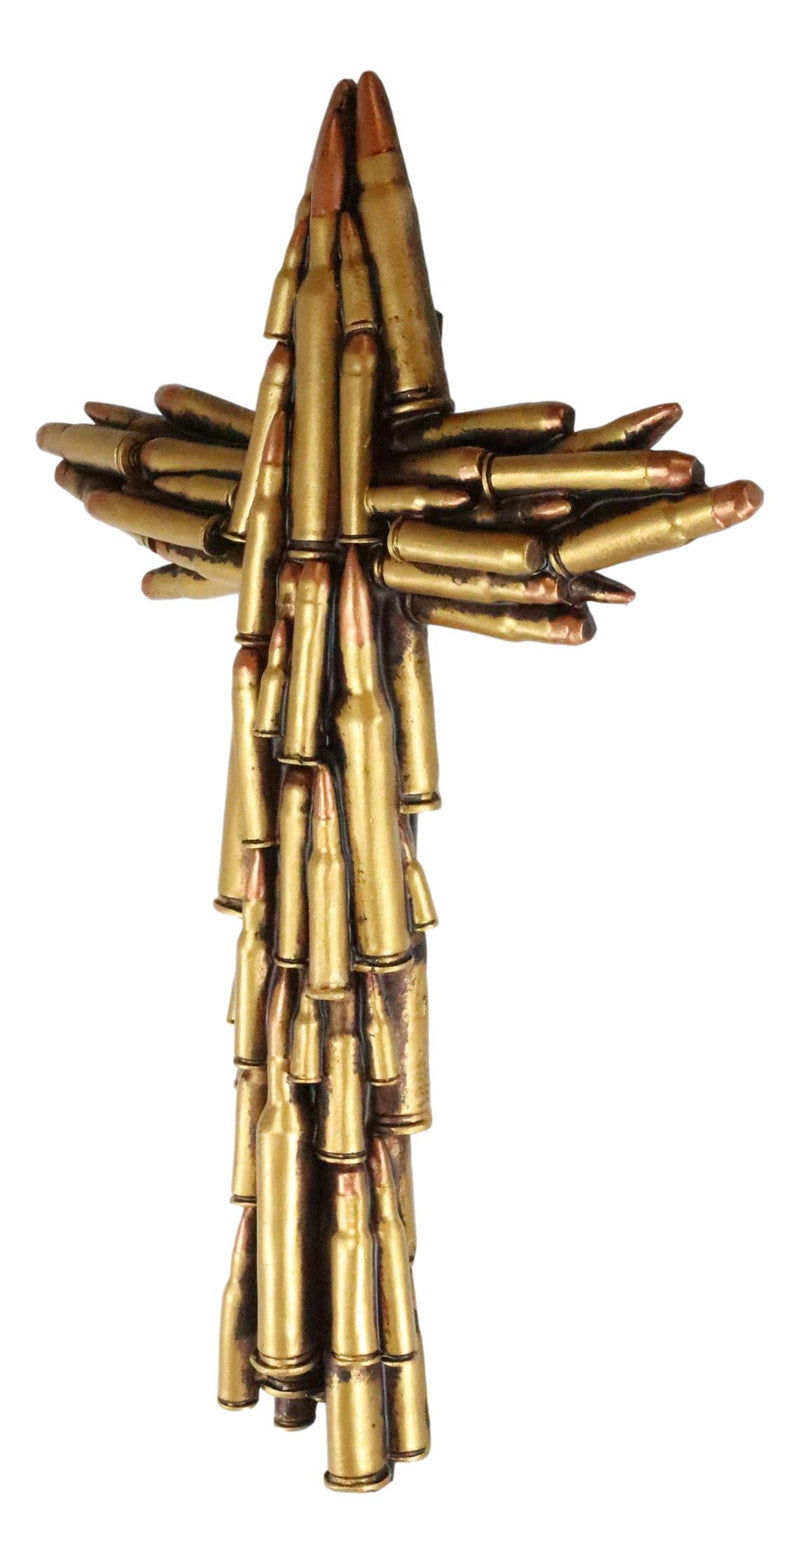 Rustic Western Stacked Hunter Golden Rifle Bullet Casings Wall Cross Plaque